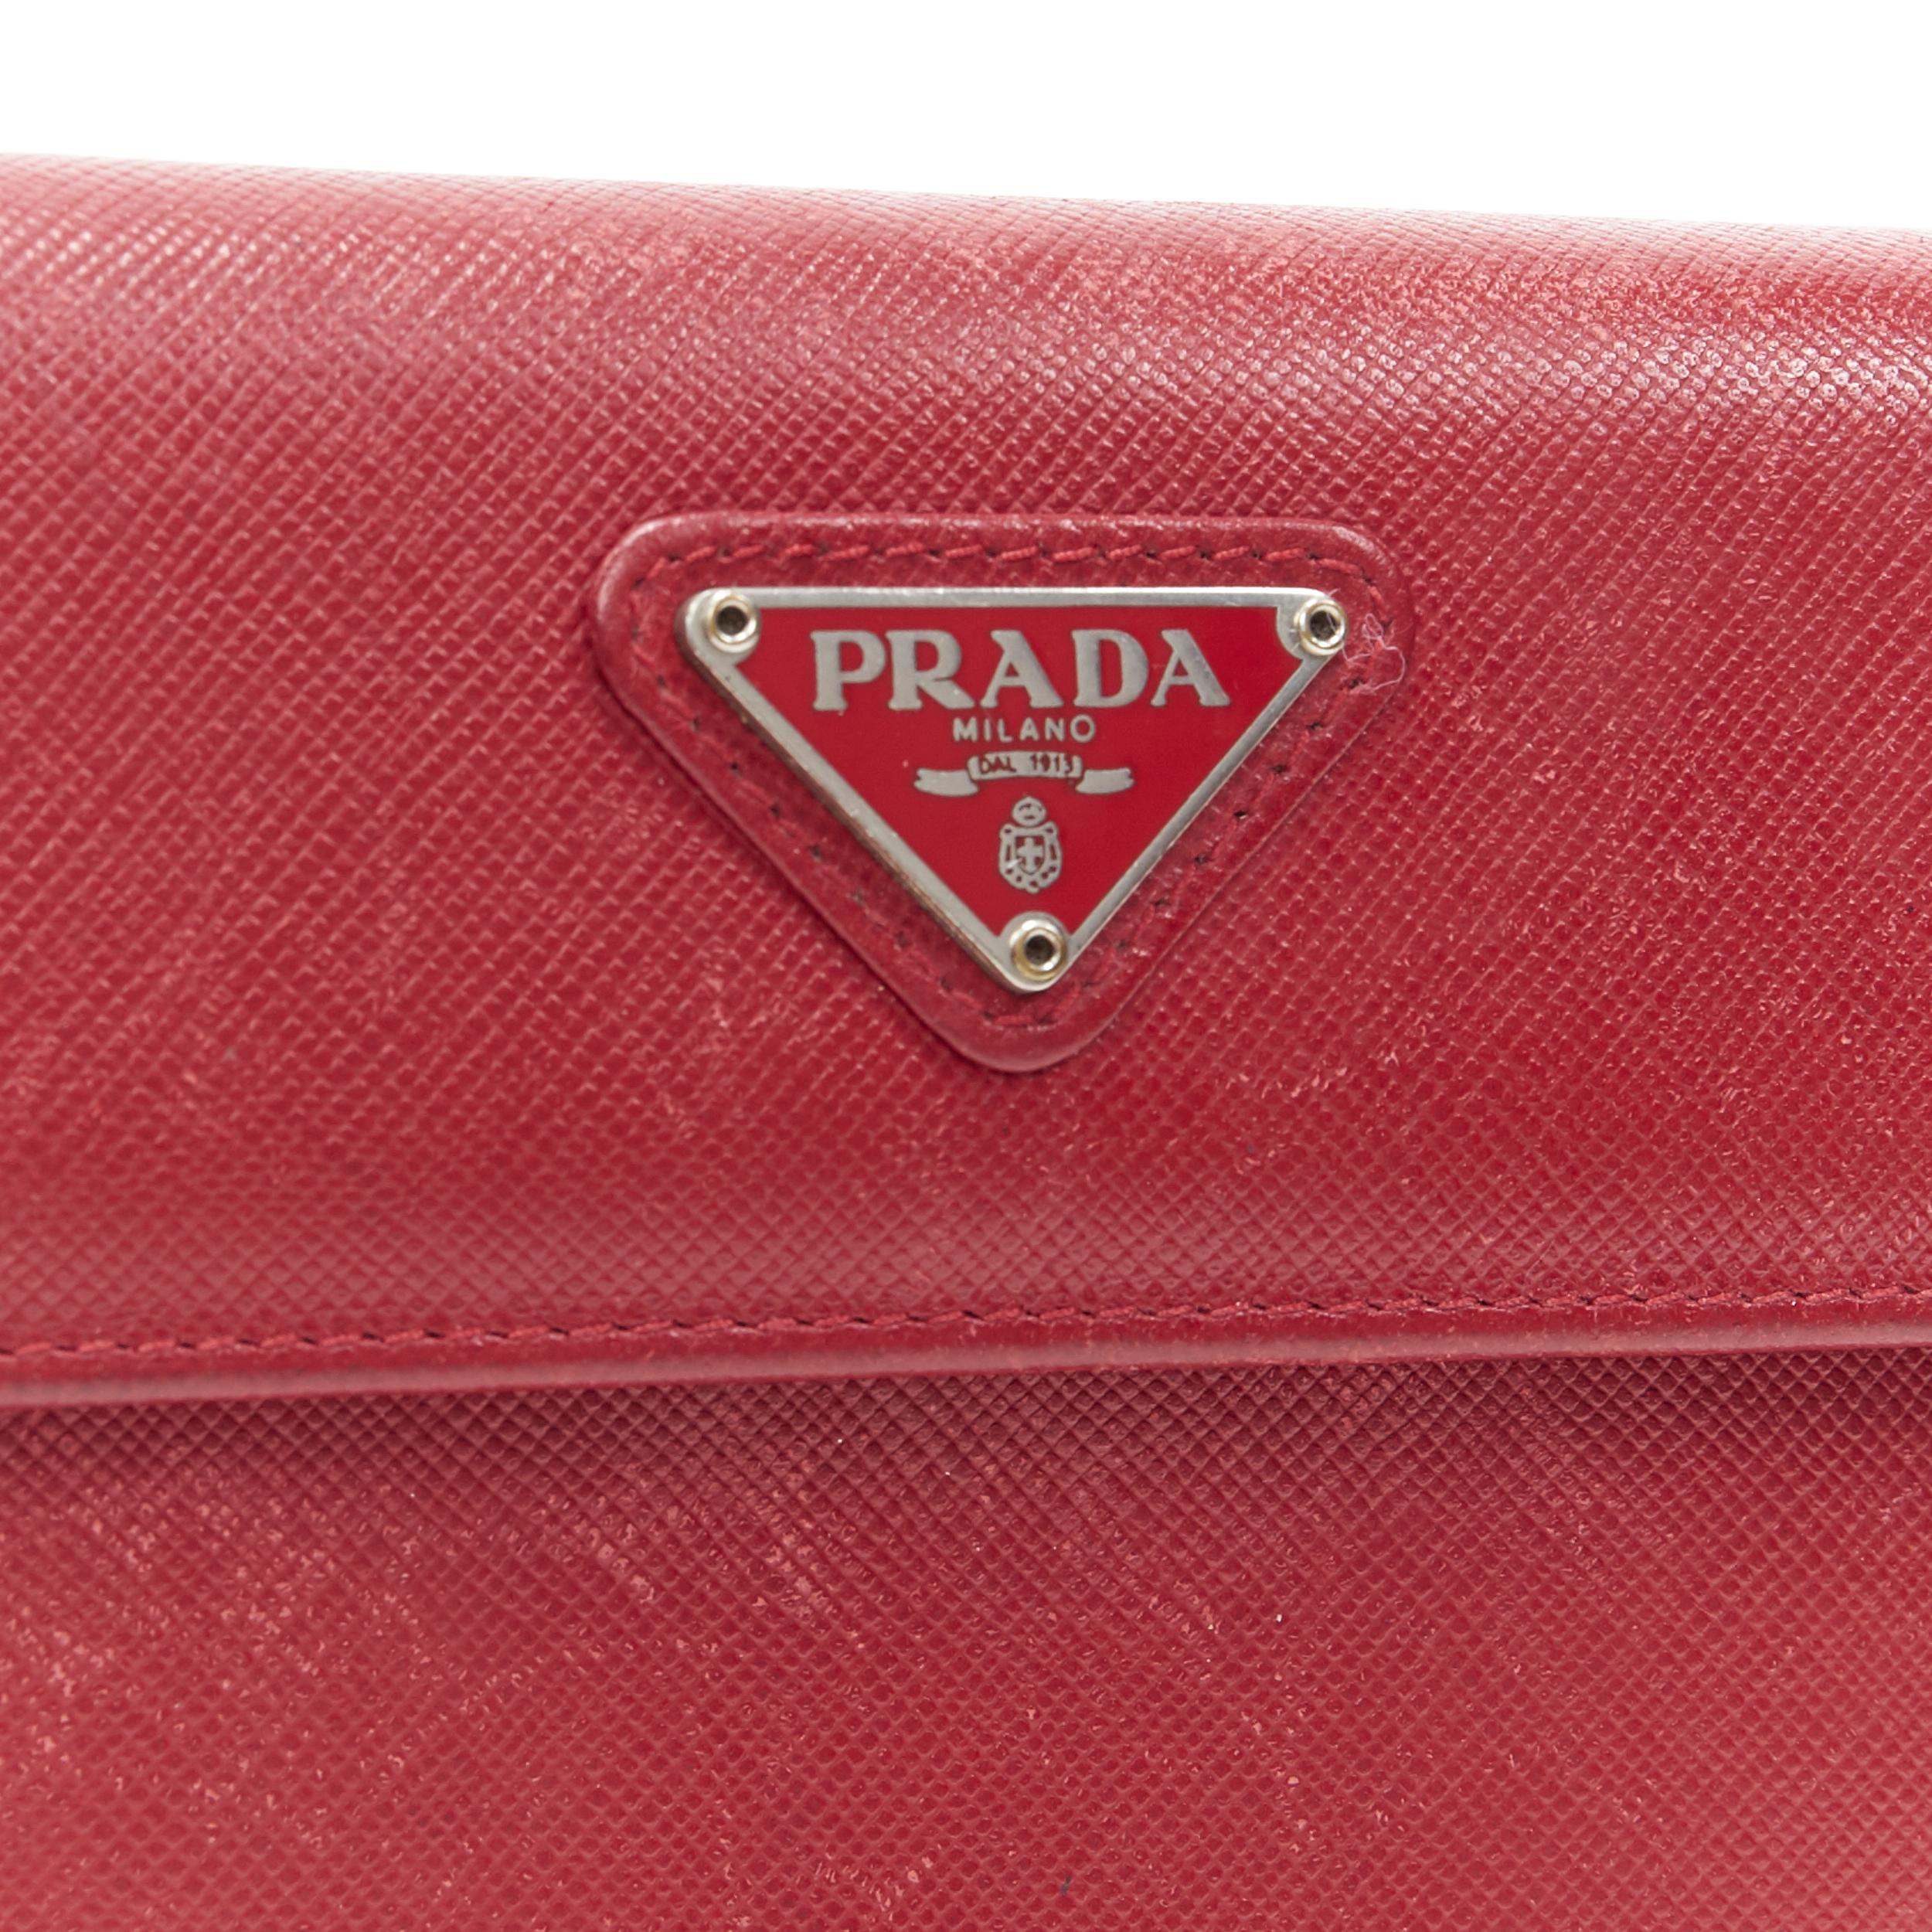 vintage PRADA red saffiano leather triangular plaque flap wallet
Brand: Prada
Model Name / Style: Leather wallet
Material: Leather
Color: Red
Pattern: Solid
Closure: Button
Made in: Italy

CONDITION: 
Condition: Poor, this item was pre-owned and is